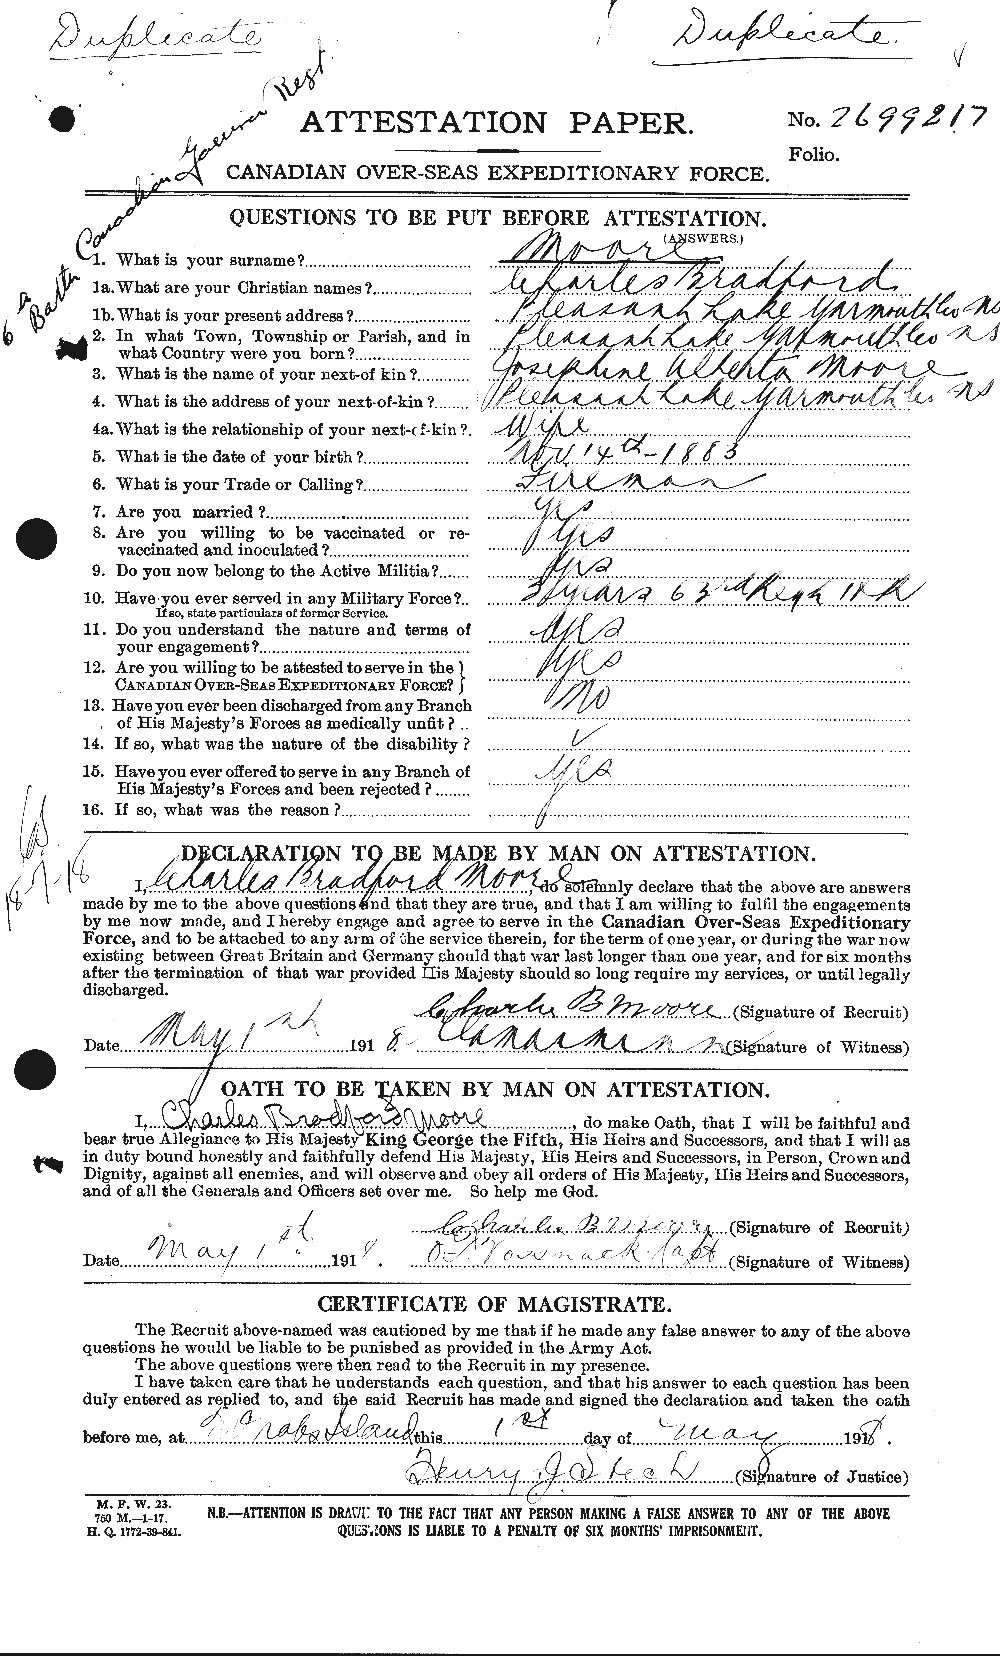 Personnel Records of the First World War - CEF 506497a